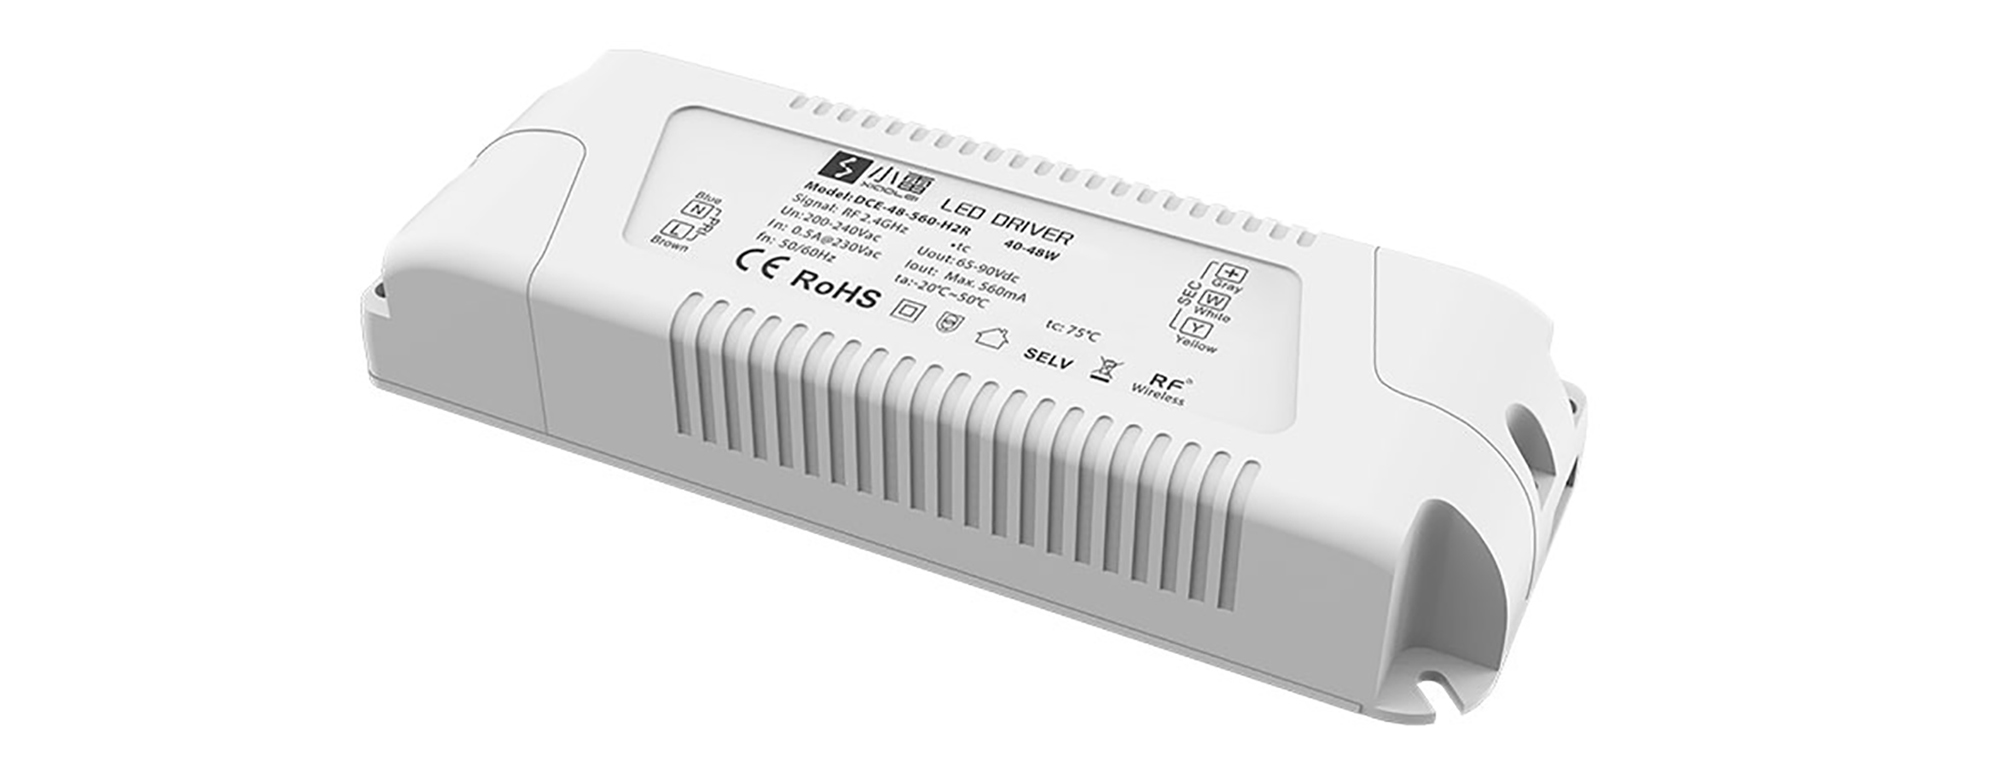 DCE-48-560-H2R  Ltech Smart home Wireless Dimmablre LED Driver 48W 60-90Vdc /560mA.0-100% PWM dimming,Over voltage, over load and Short circuit protection, IP20.